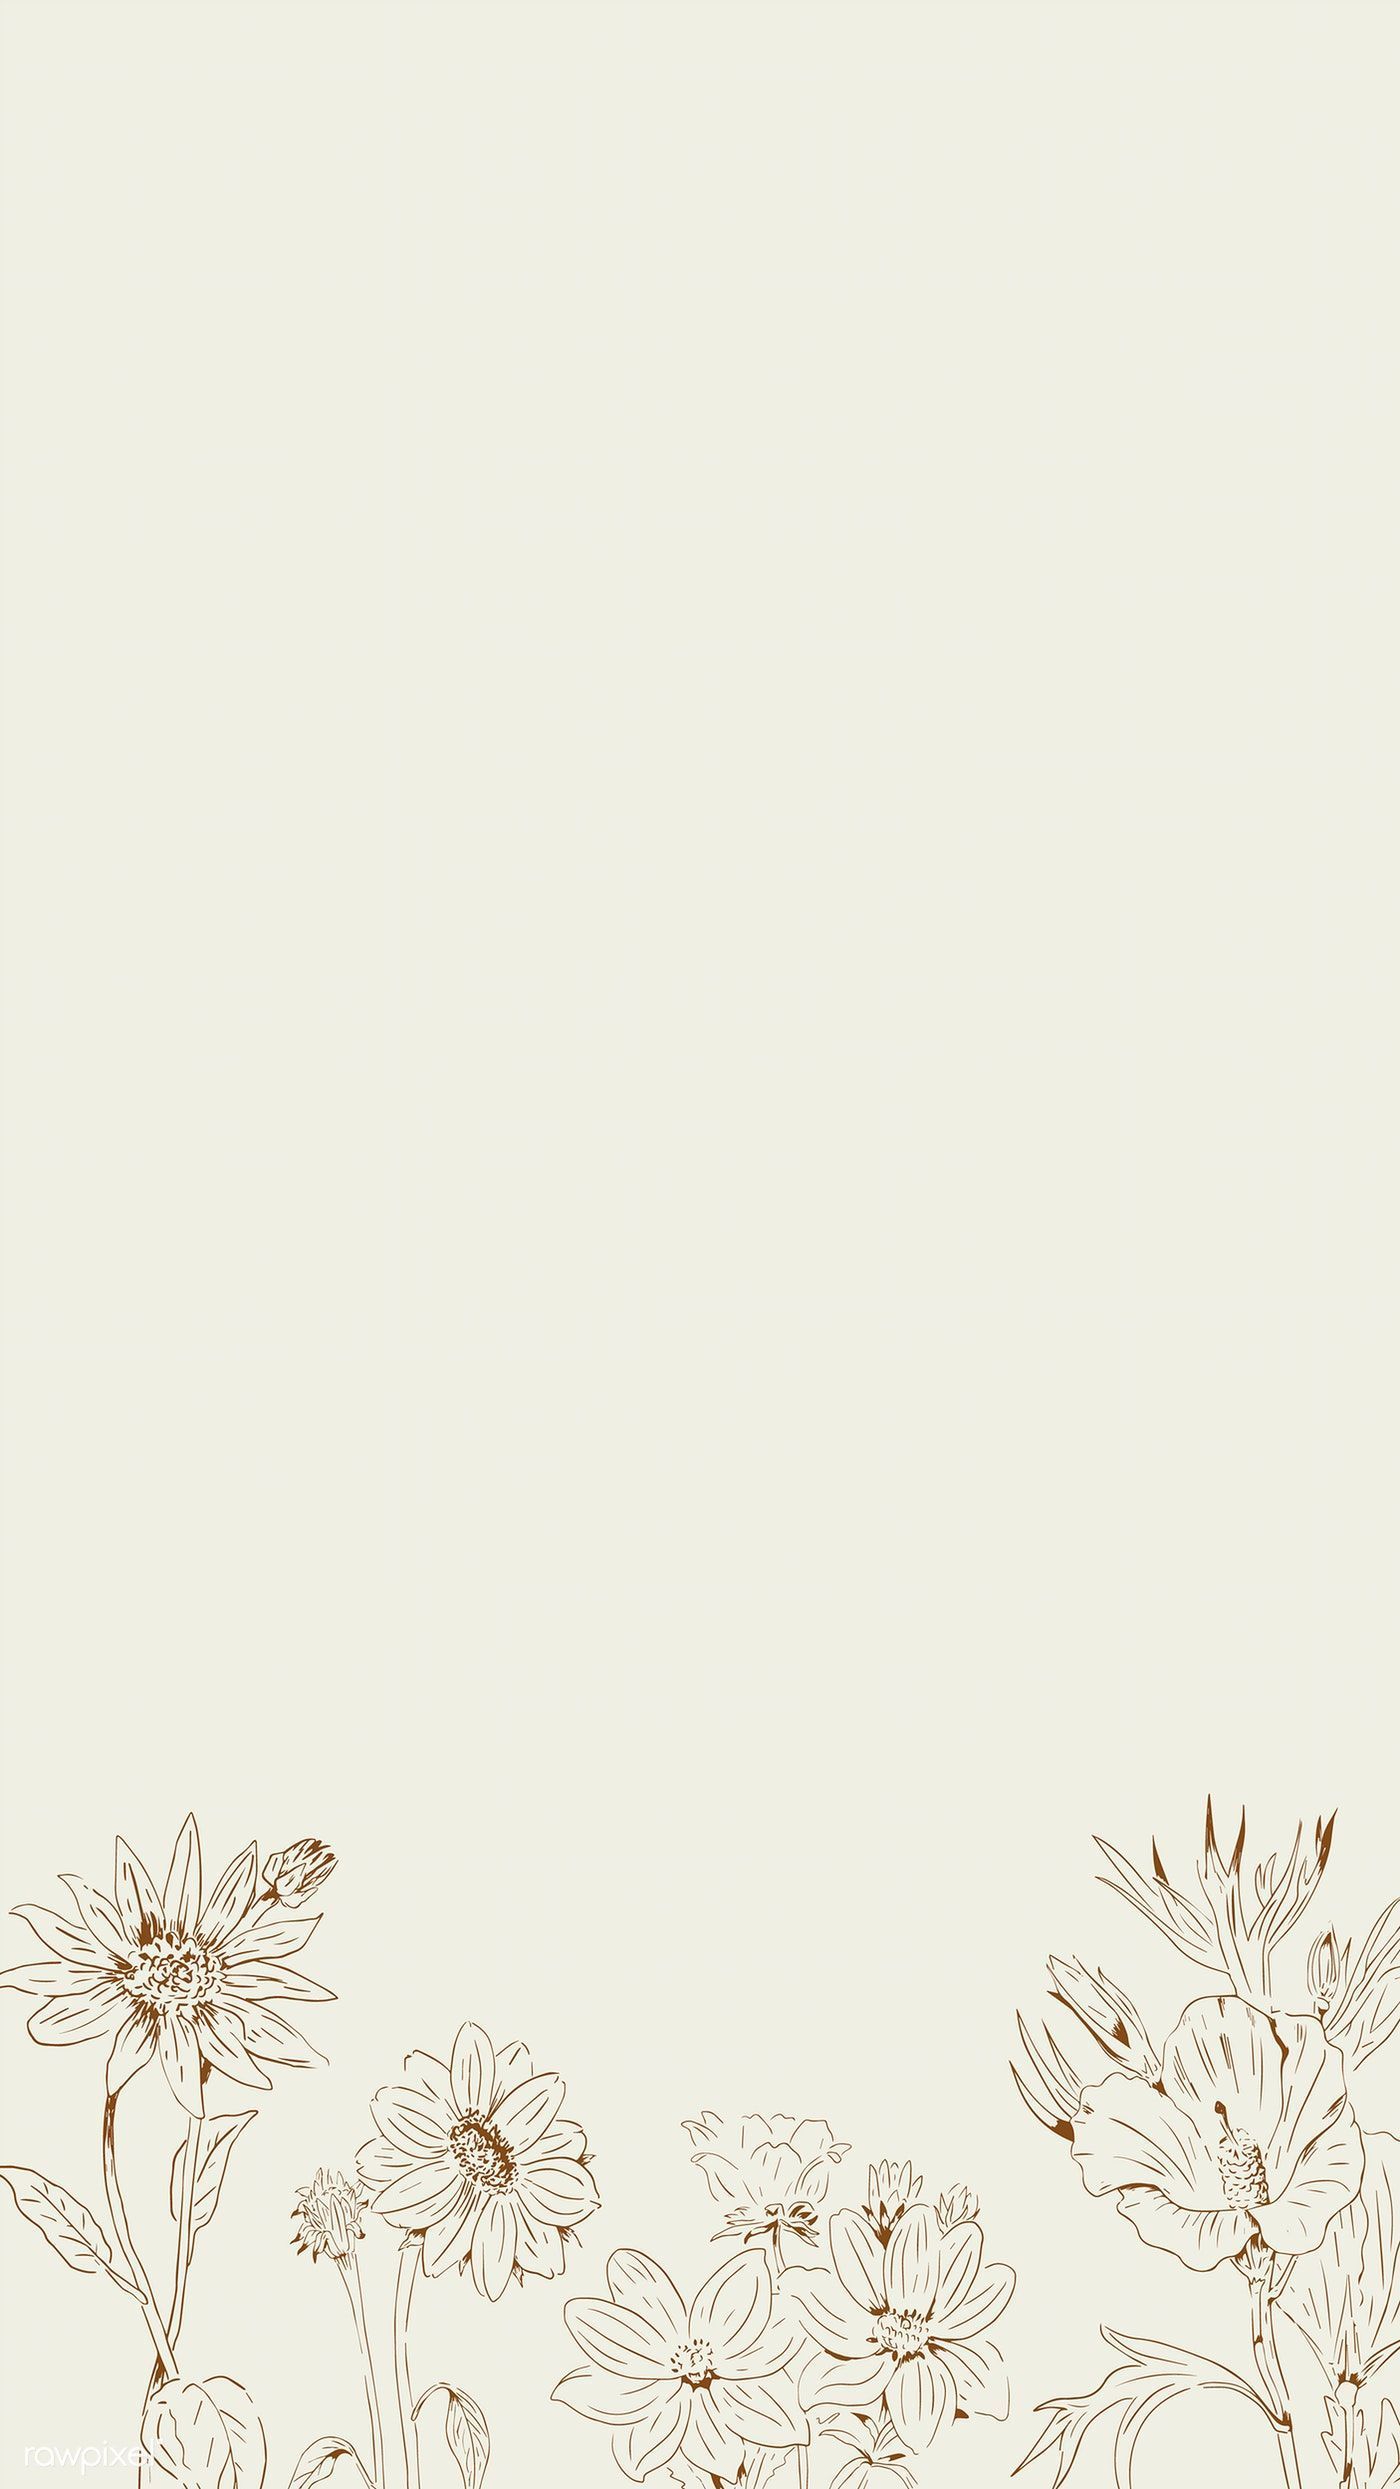 Hand drawn wildflowers patterned mobile phone wallpaper vector. premium image by rawpixel.. Simple phone wallpaper, Instagram wallpaper, Simple iphone wallpaper